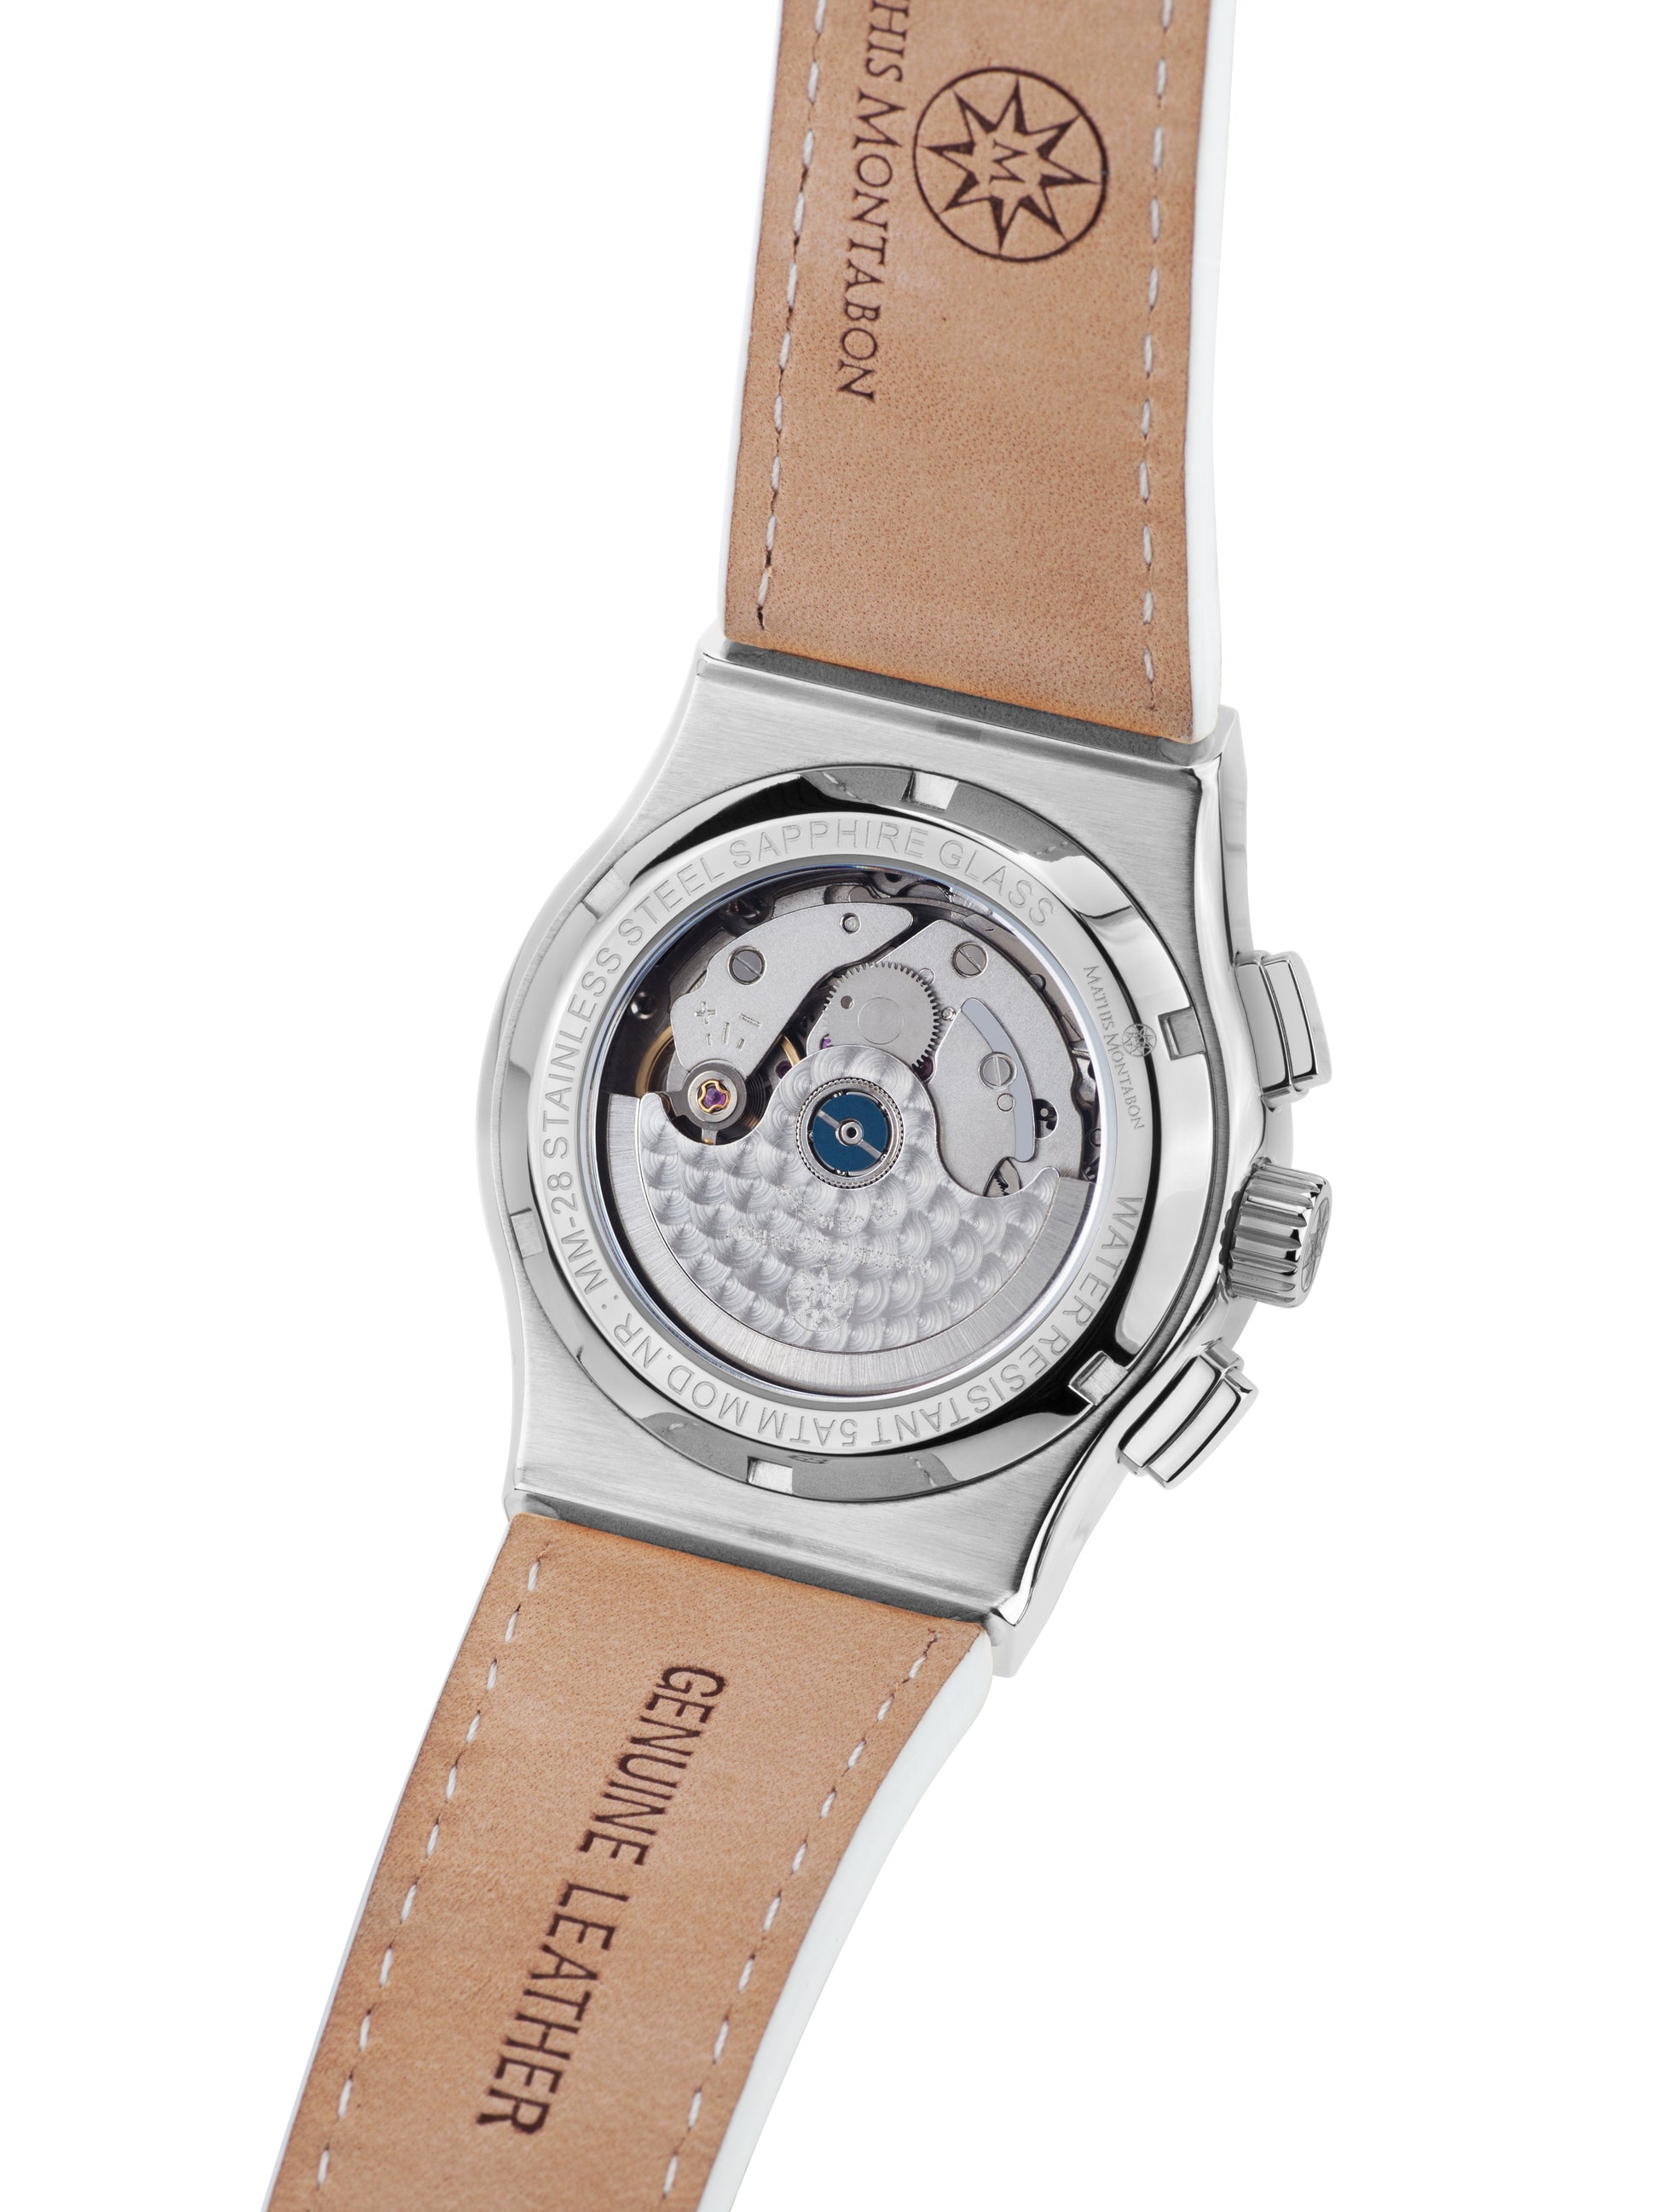 Automatic watches — Noblesse Lady — Mathis Montabon — white